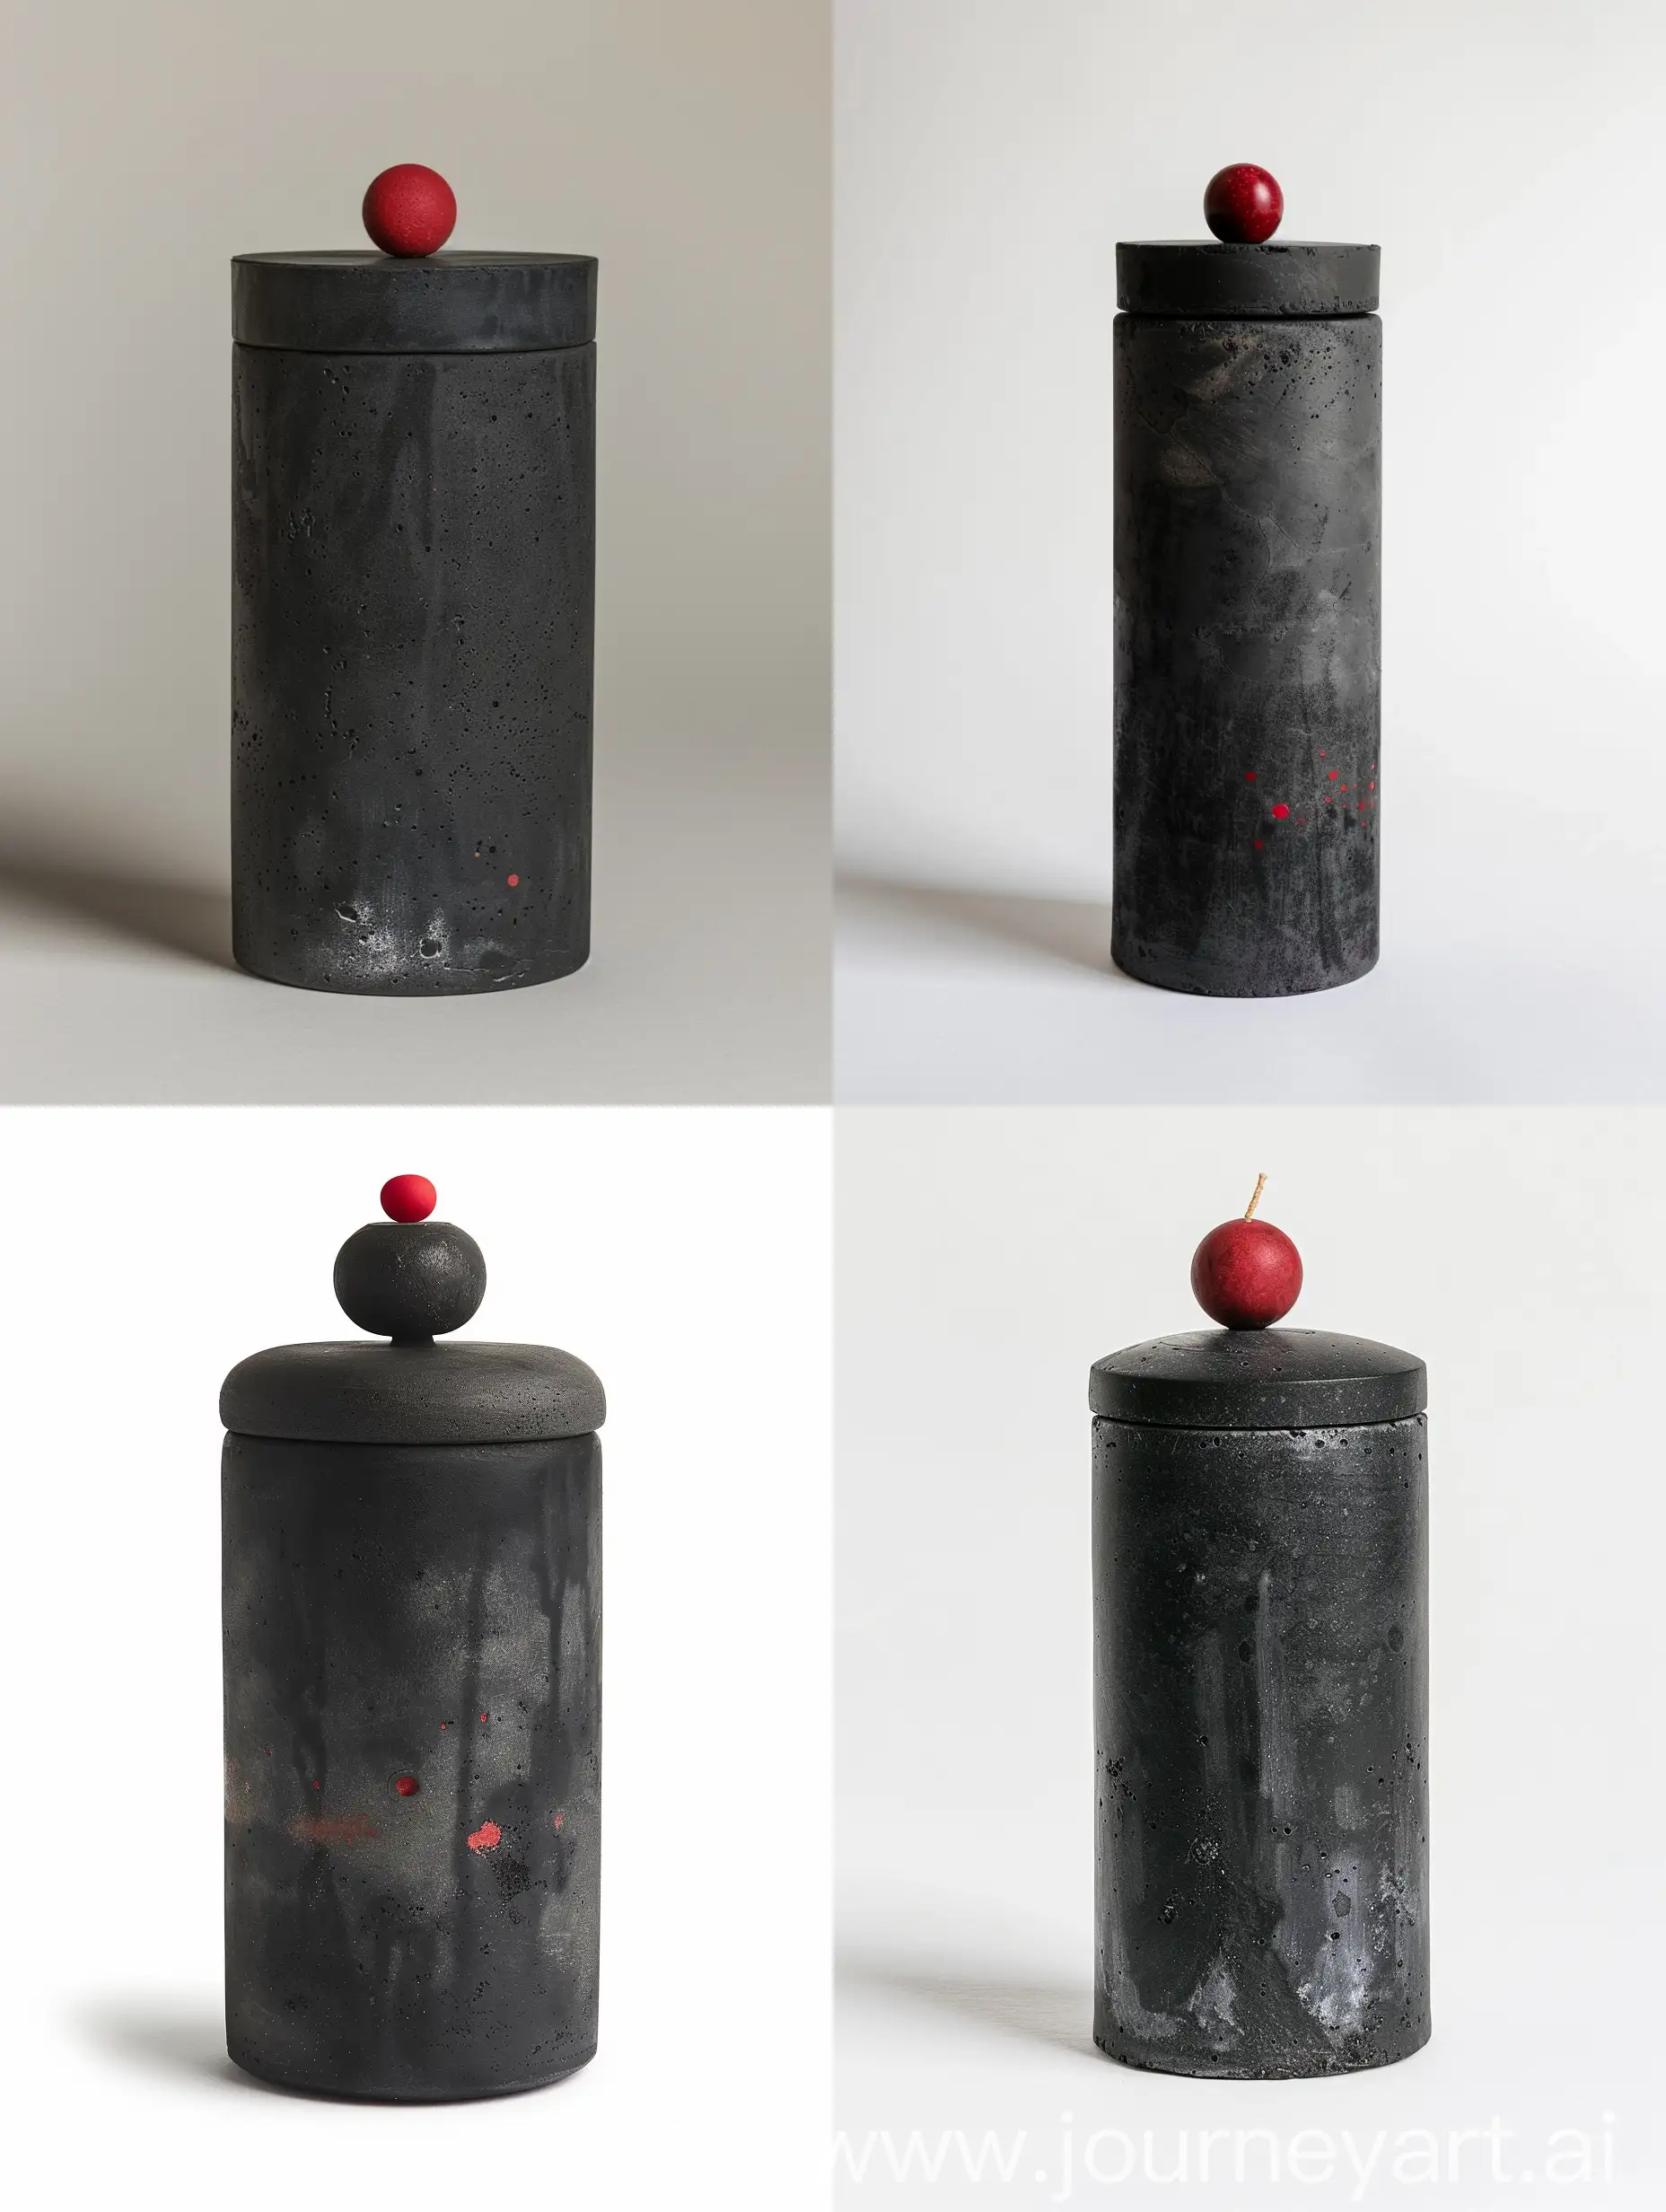 A asthetic, realistic black cyliner cement container has a cap with a single regular-sized red bead-shape on top of its cap, intended to hold a scented candle